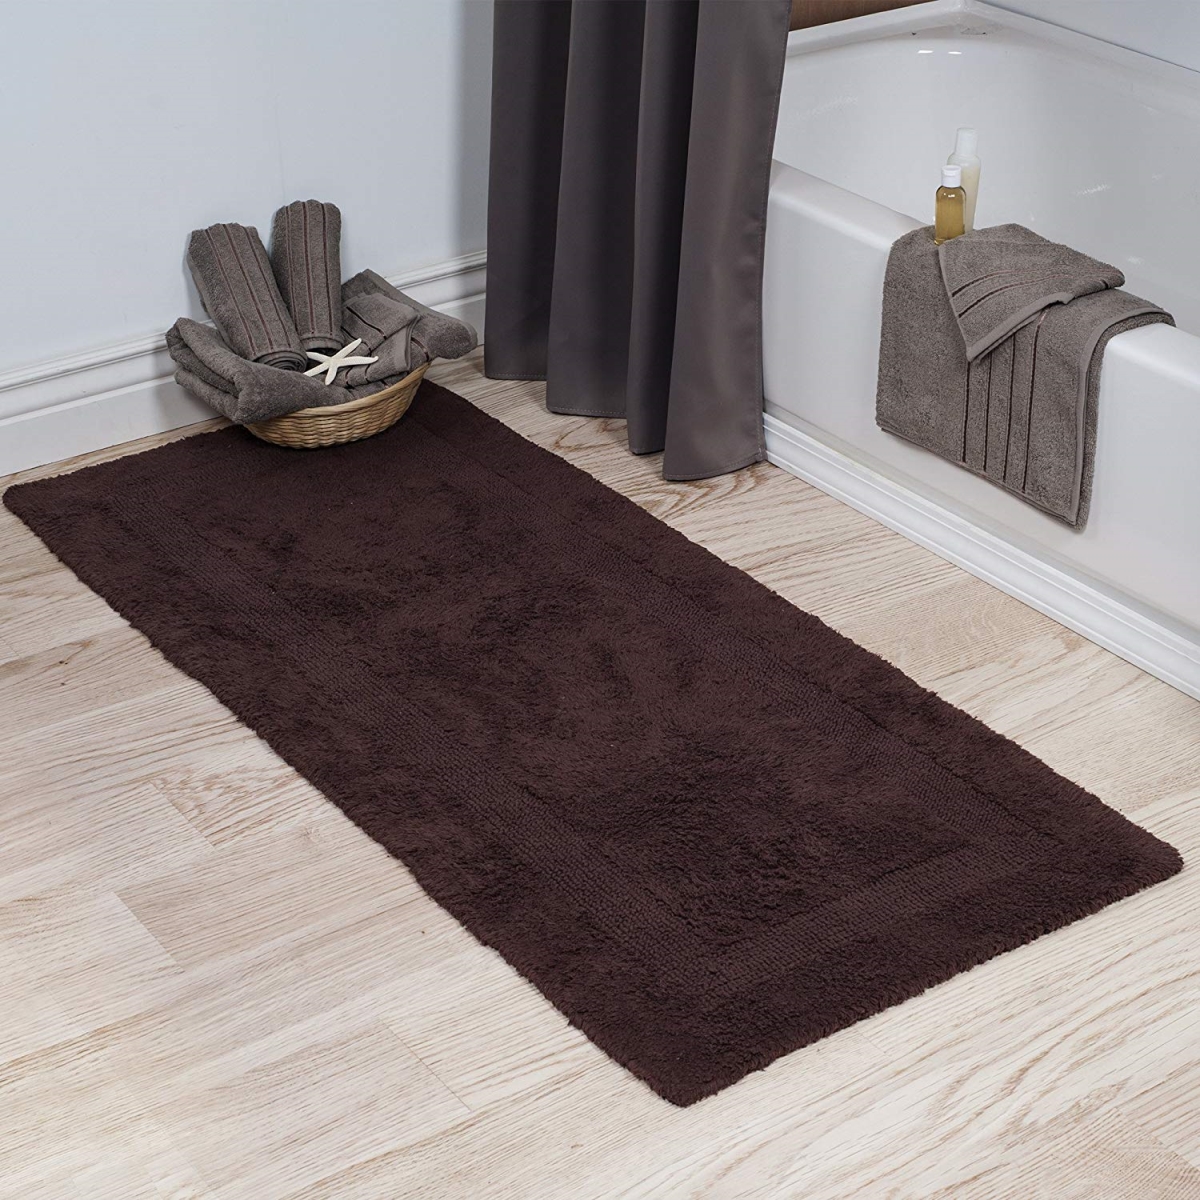 Picture of Bedford Home 67A-01578 100 Percent Cotton Reversible Long Bath Rug - Chocolate - 24 x 60 in.